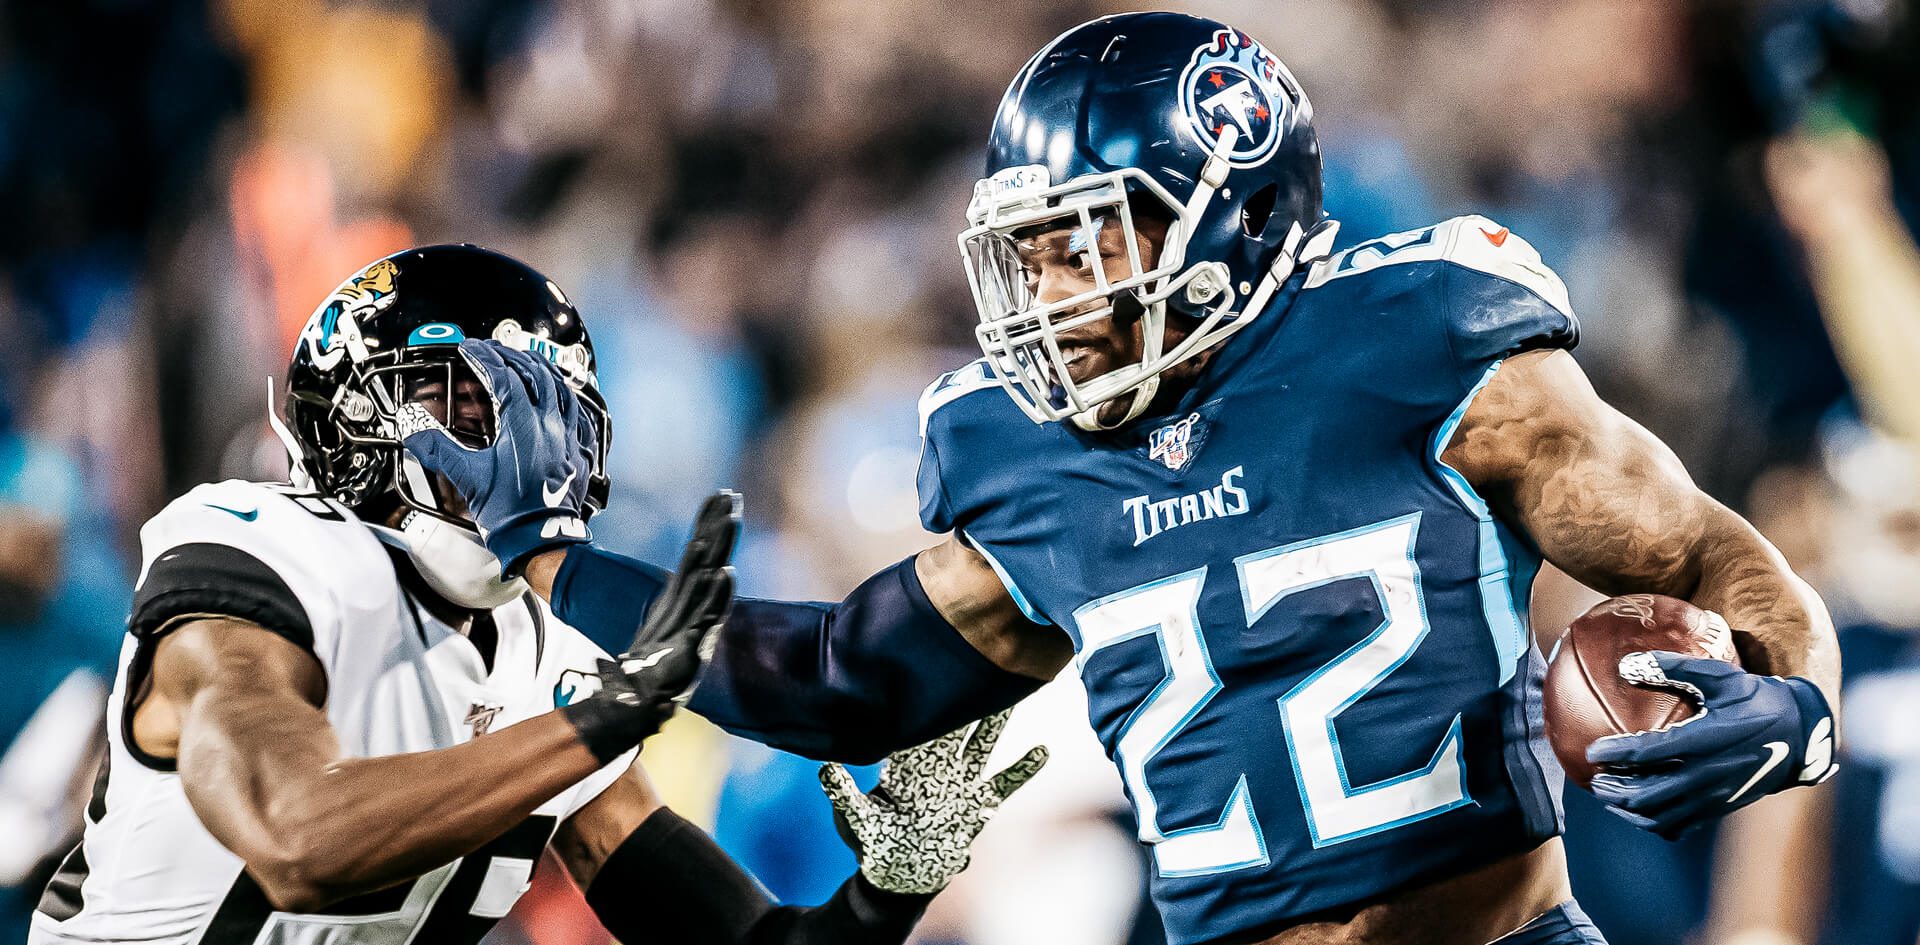 Titans to Play Jaguars in Home Opener Sunday at Nissan Stadium